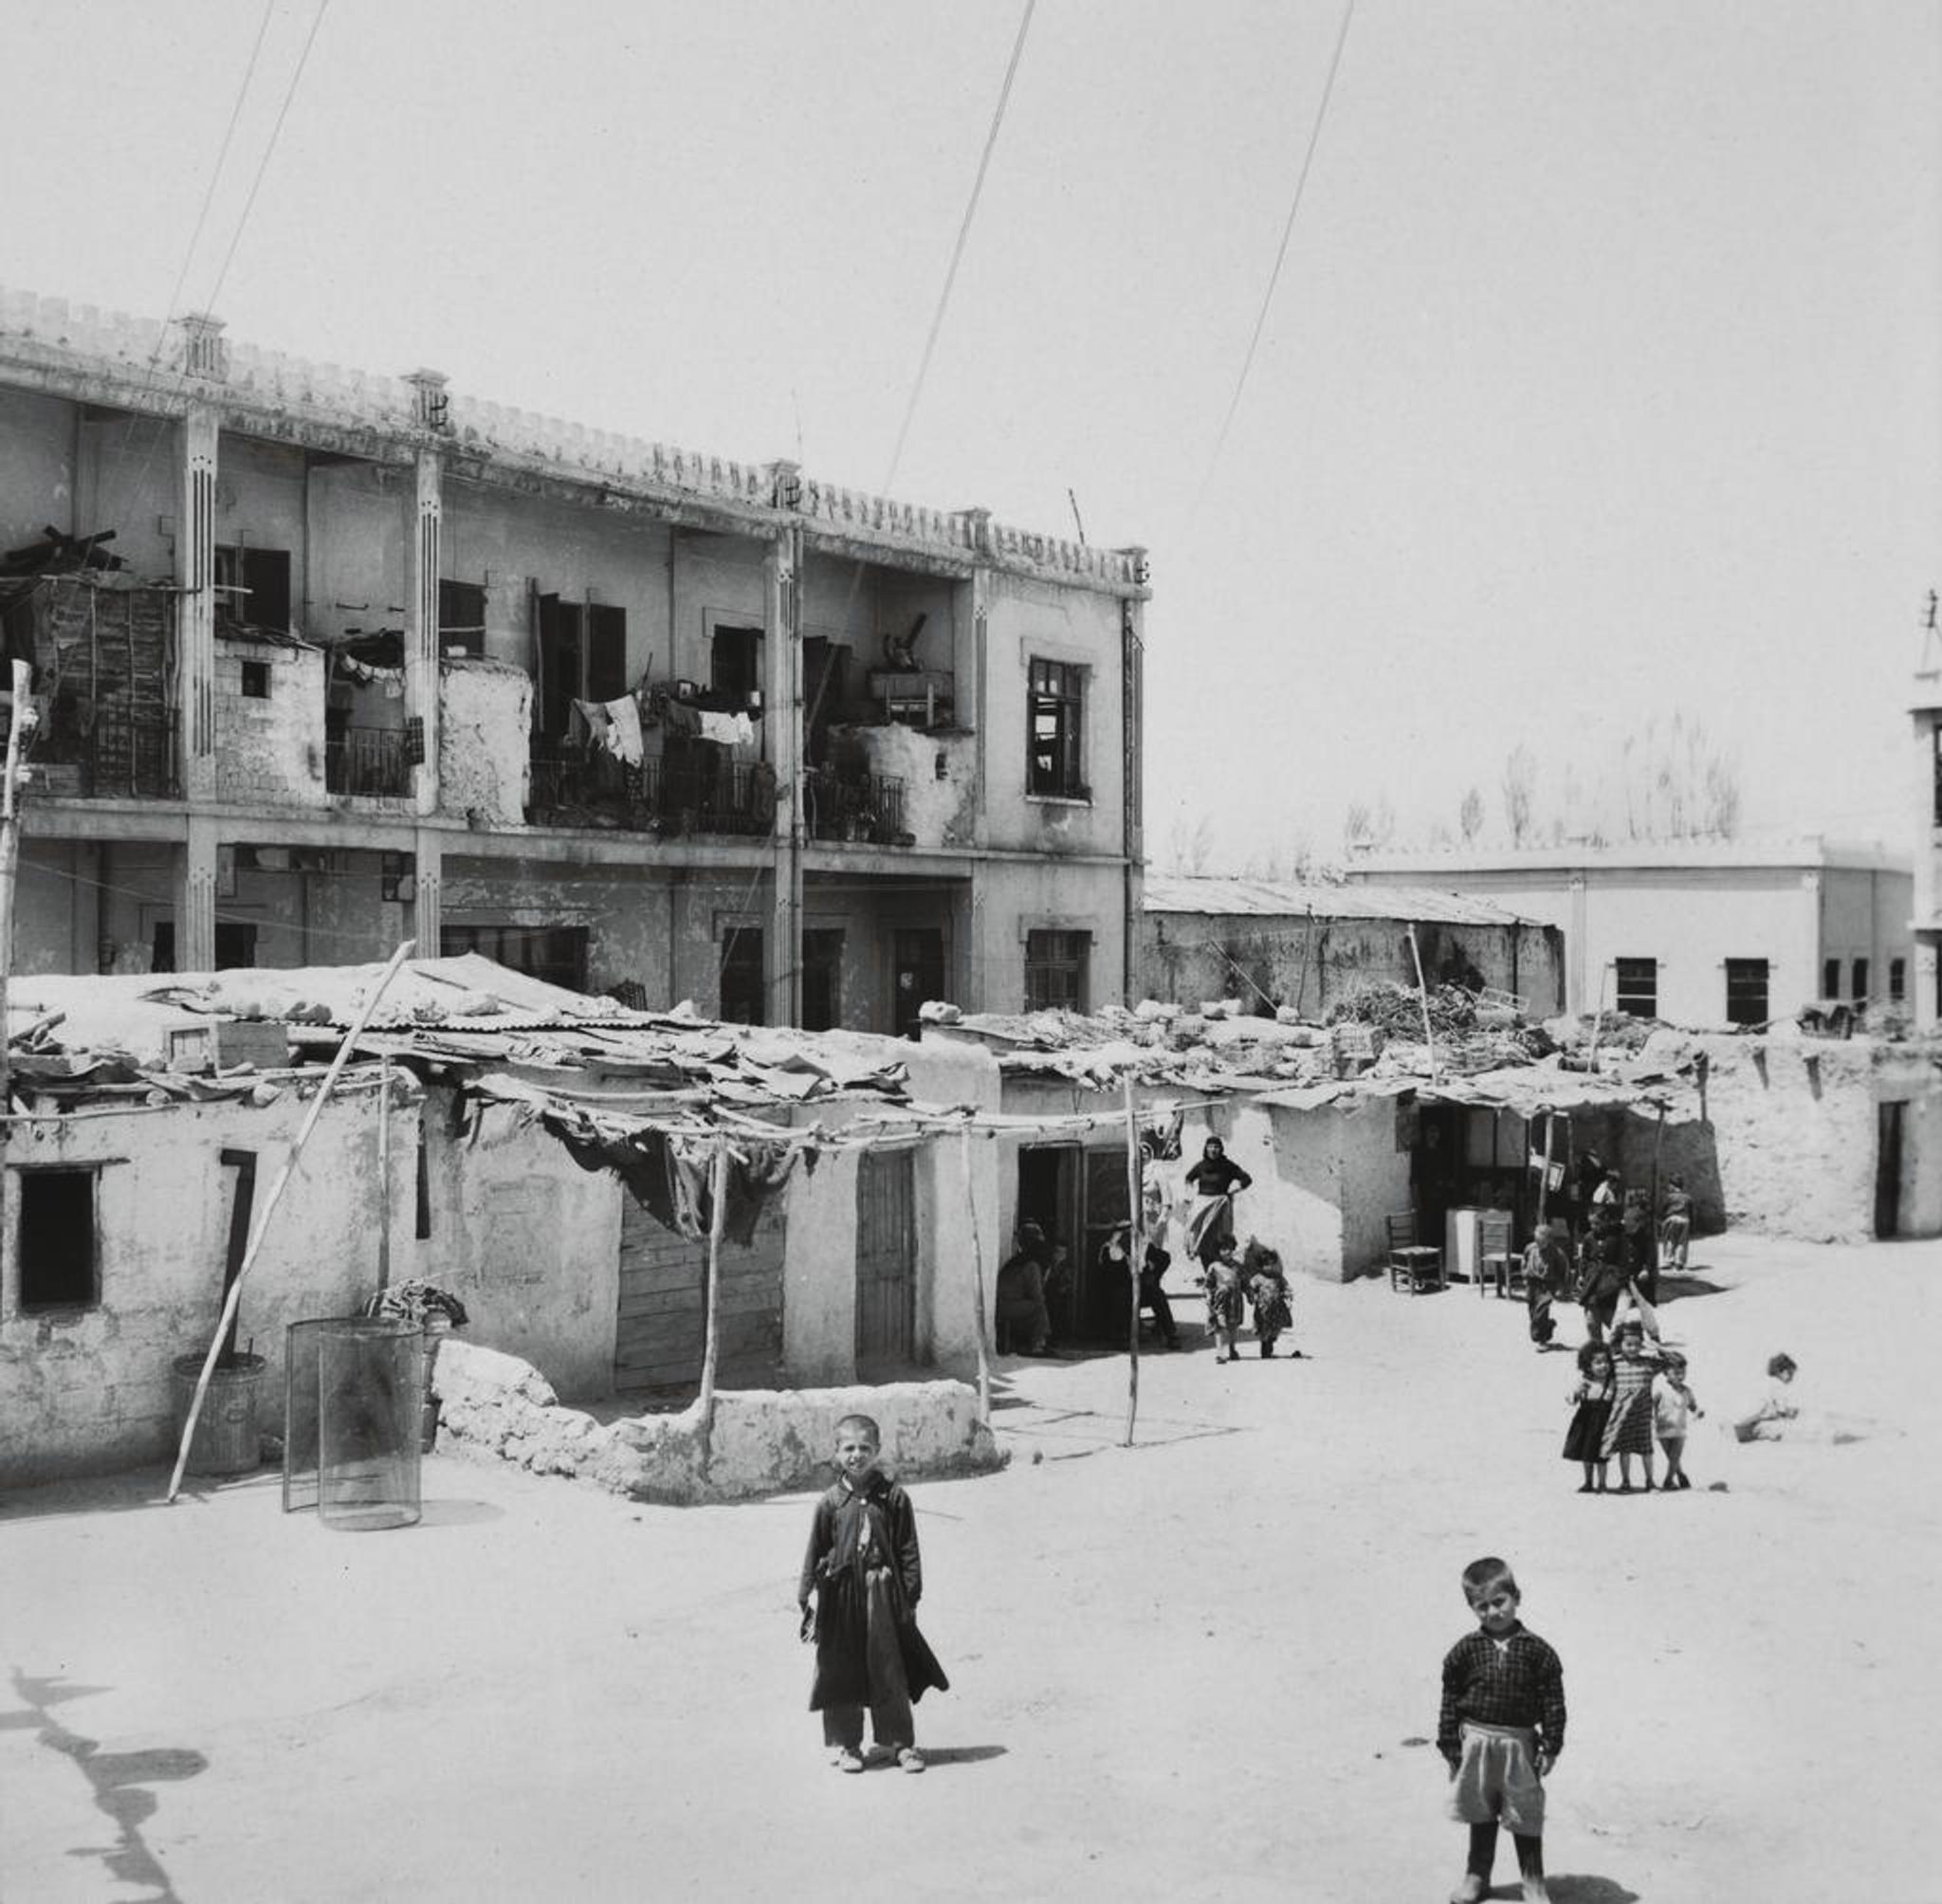 Children in front of a two storey residential building. Drying clothes hanging on and in front the building.